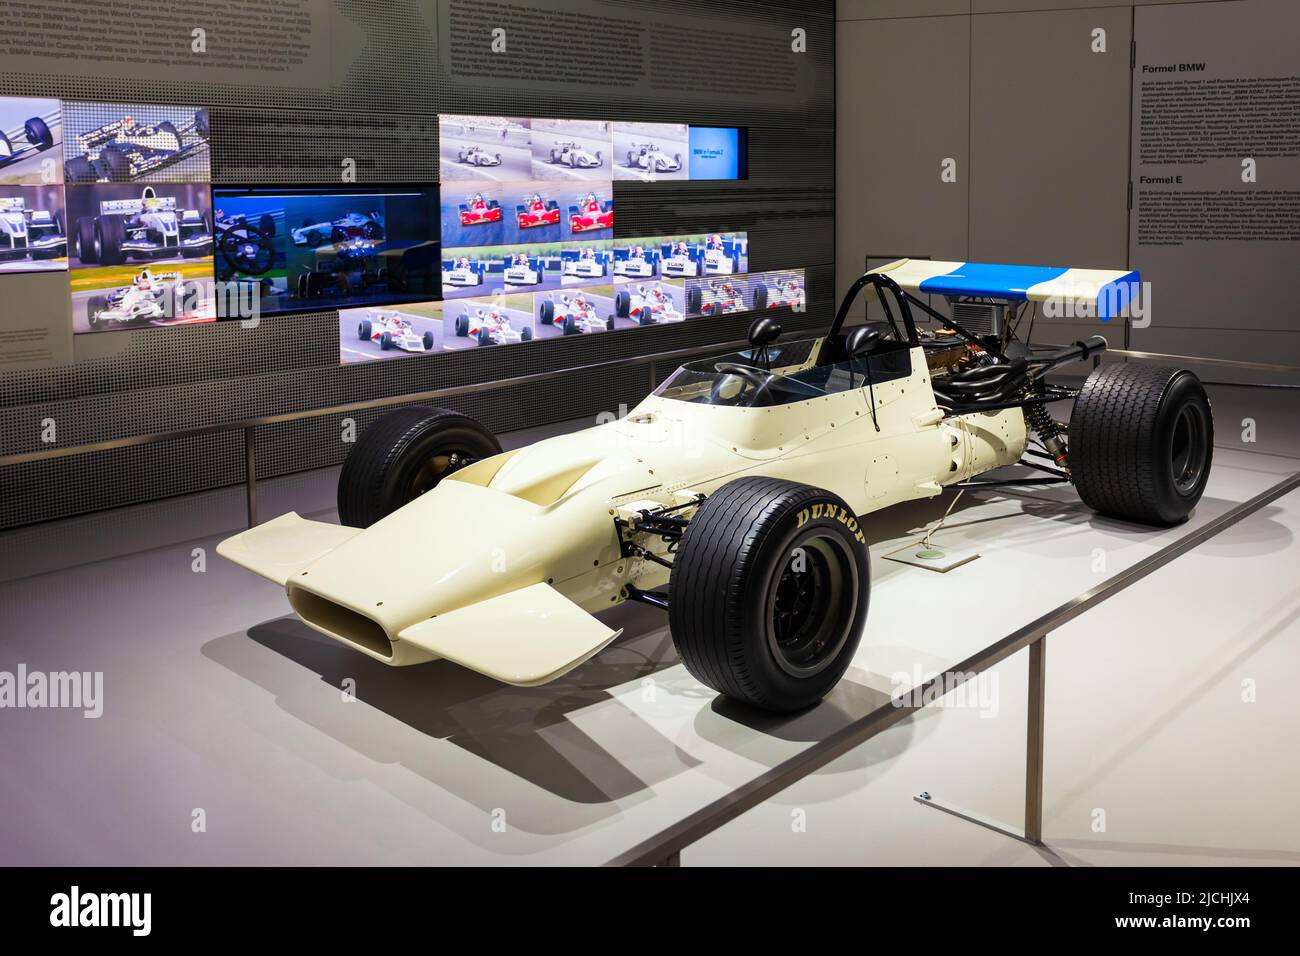 Munich, Germany - July 08, 2021: BMW Formula car at BMW Museum interior, it is an automobile museum of BMW history located near the Olympiapark in Mun Stock Photo